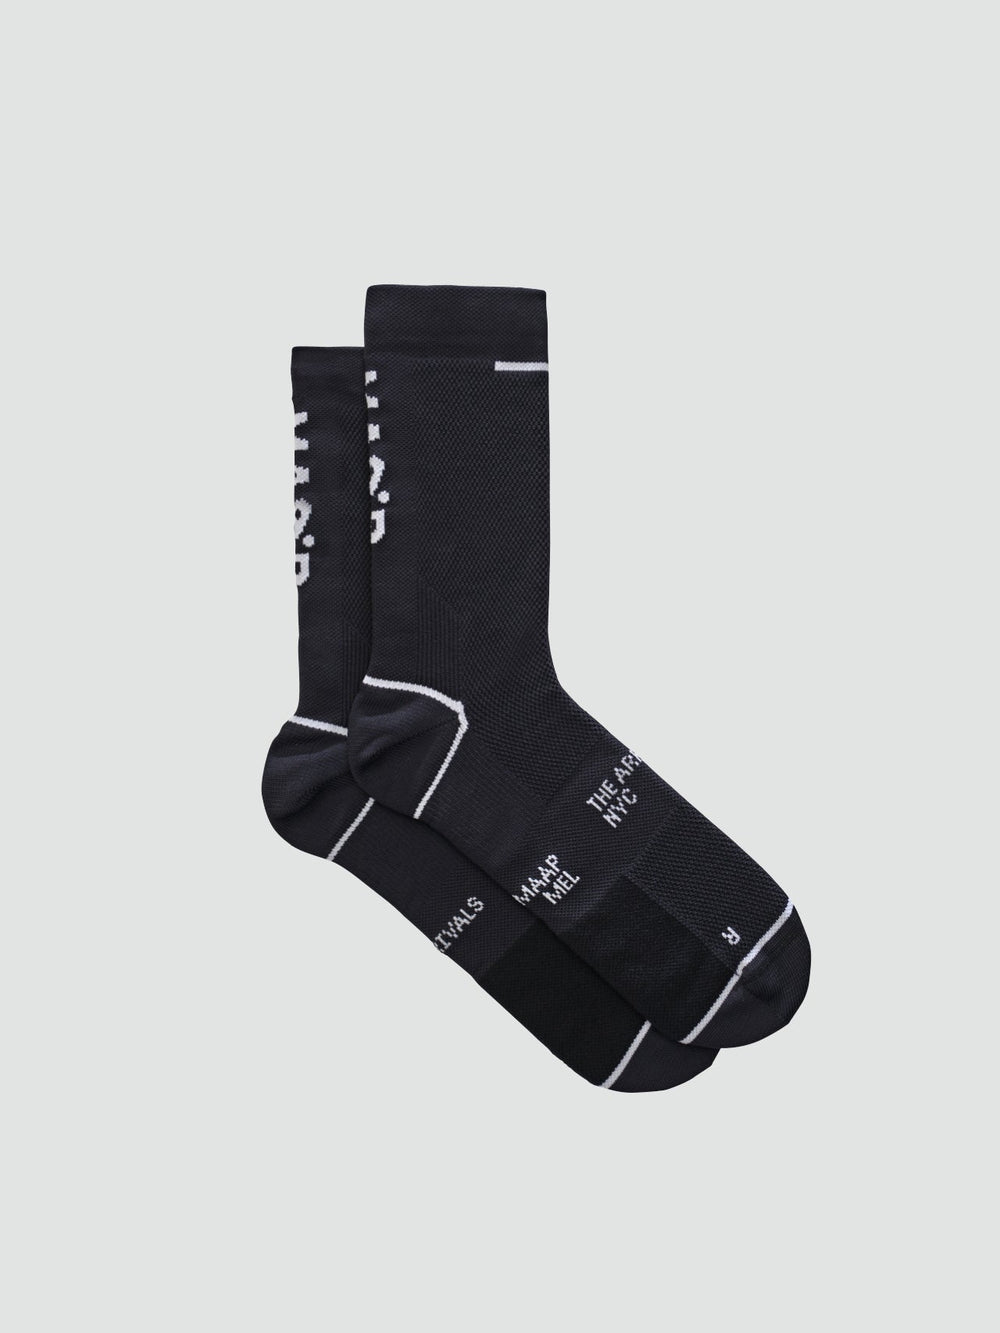 Product Image for The Arrivals + MAAP Sock